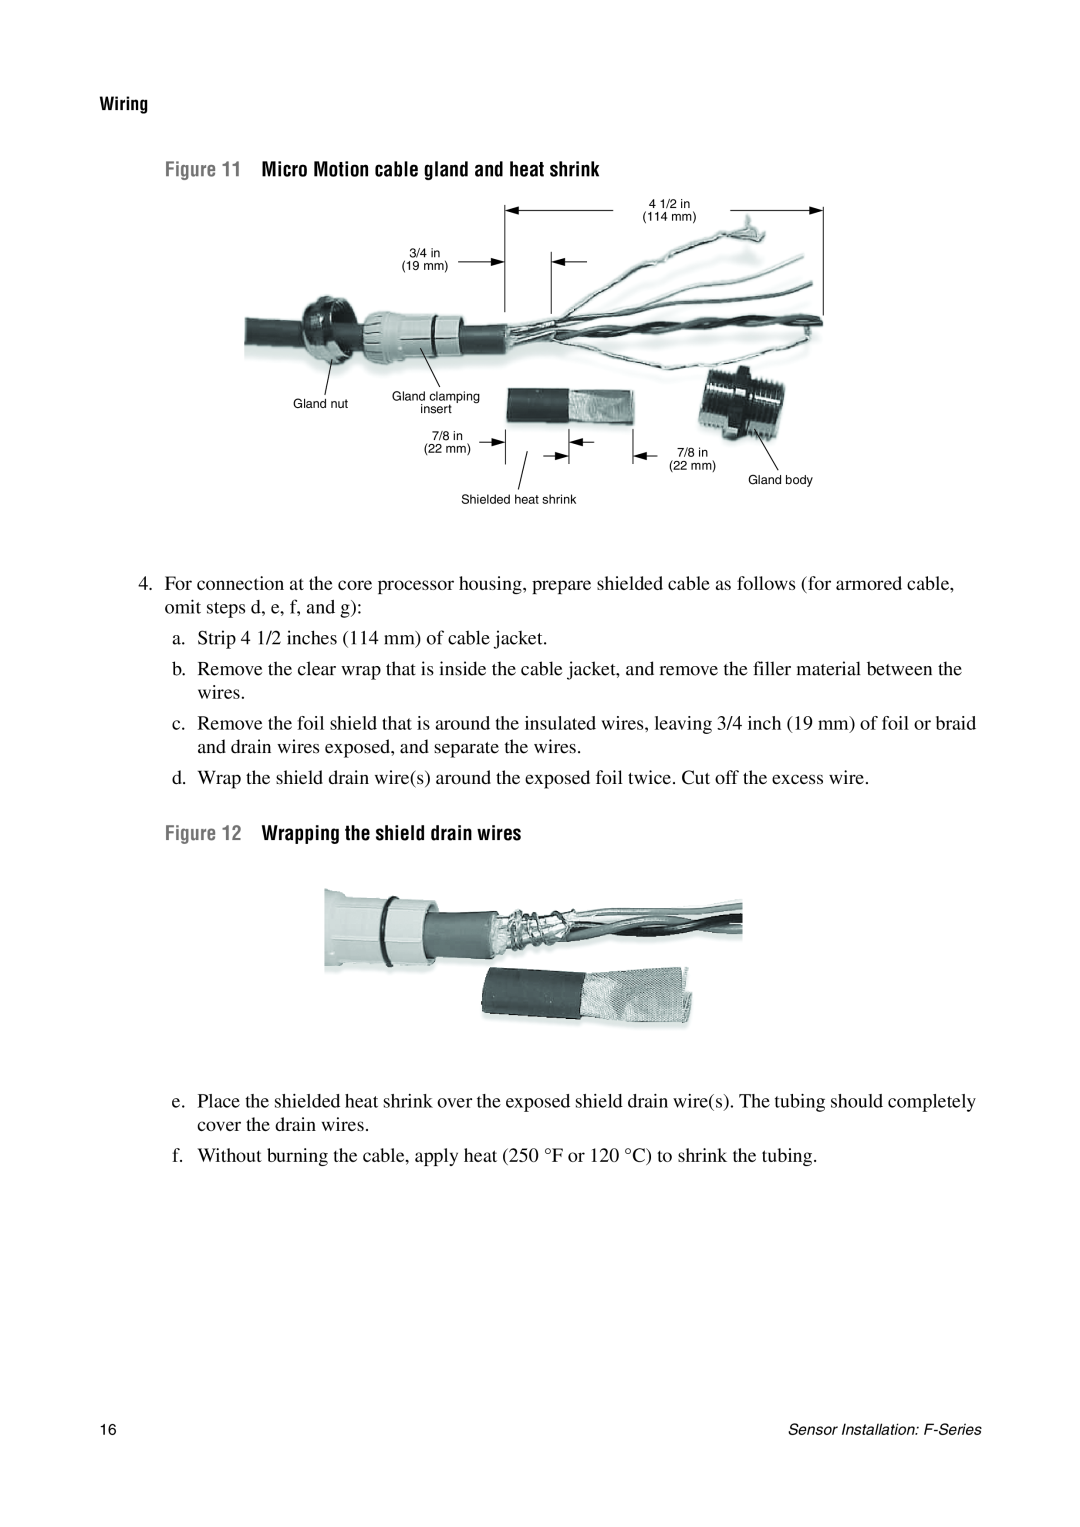 Emerson F-SERIES SENSOR installation manual Wrapping the shield drain wires 